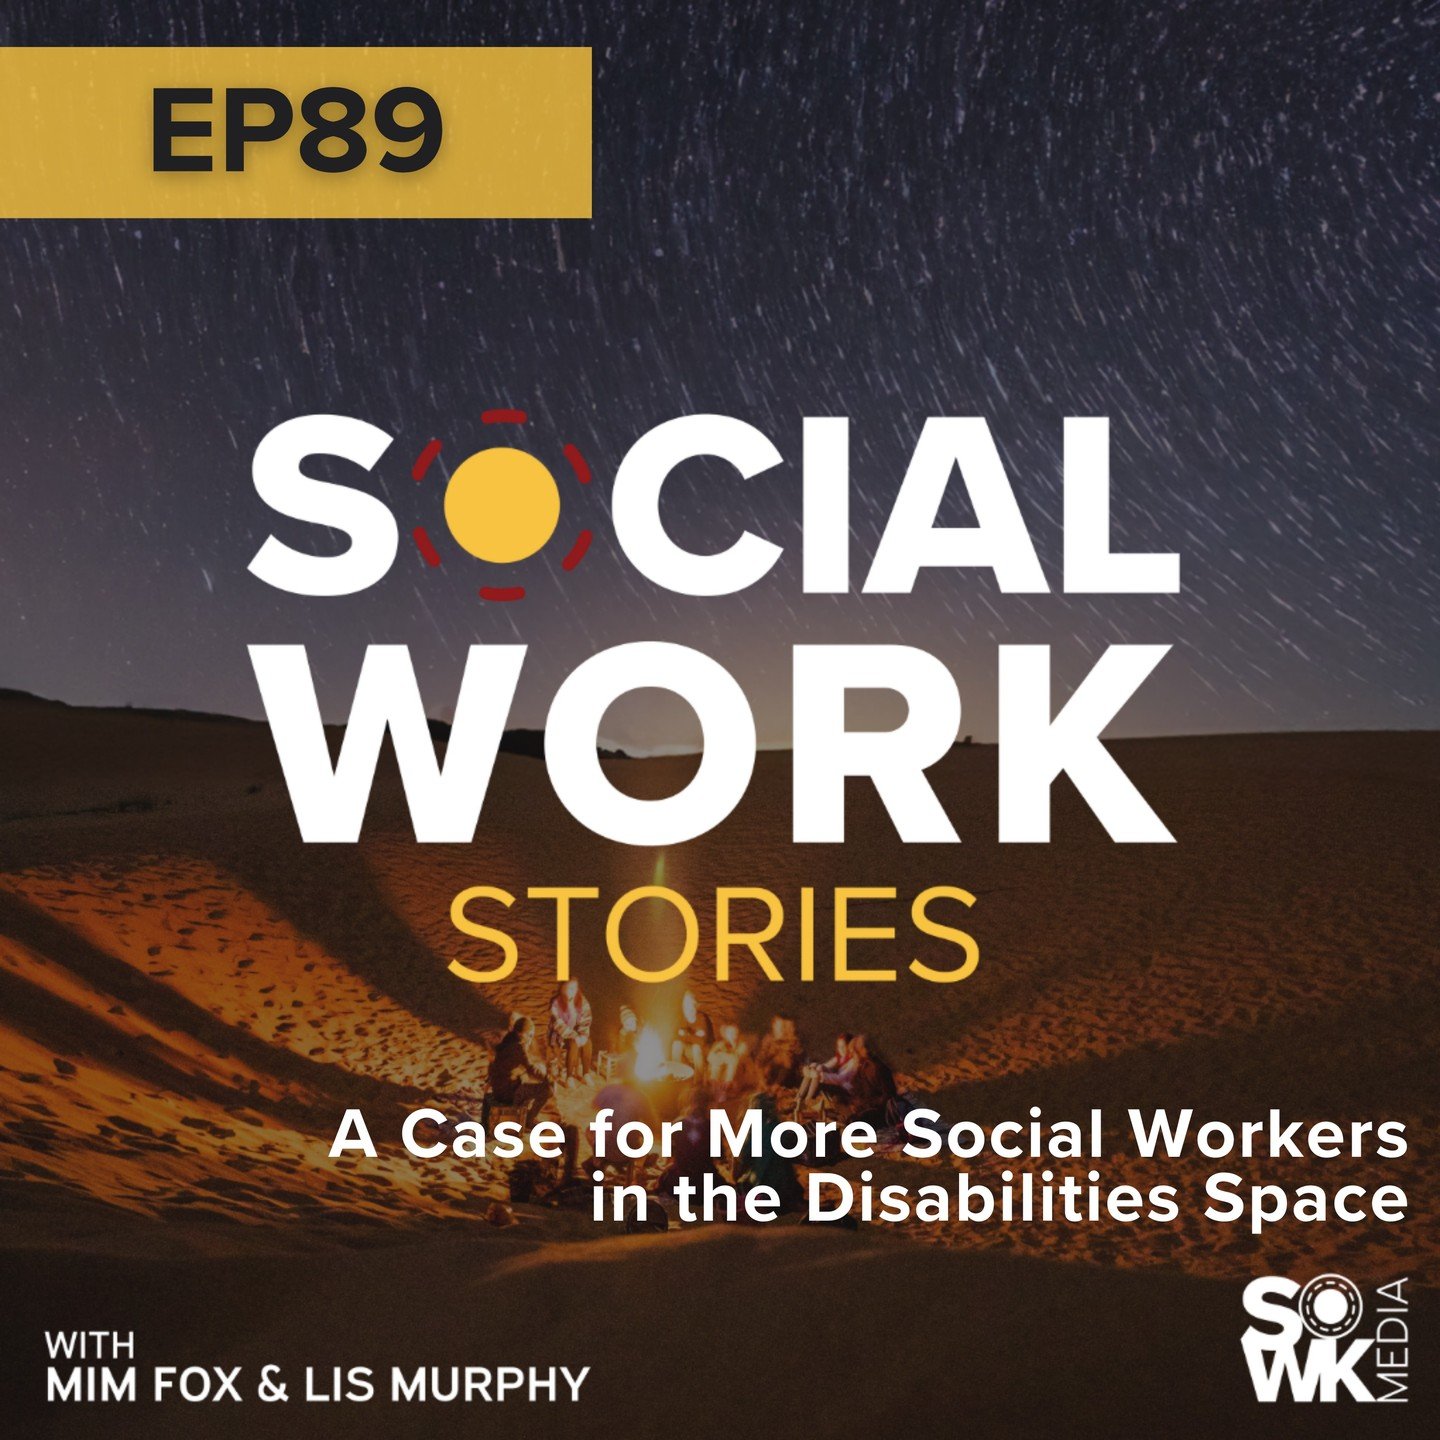 Listen to episode 89 where Lis and Mim delve into a rich practice story from a social worker in the disabilities space, supporting a mother and her children experiencing domestic violence, while working to meet the high support needs of one of the ch